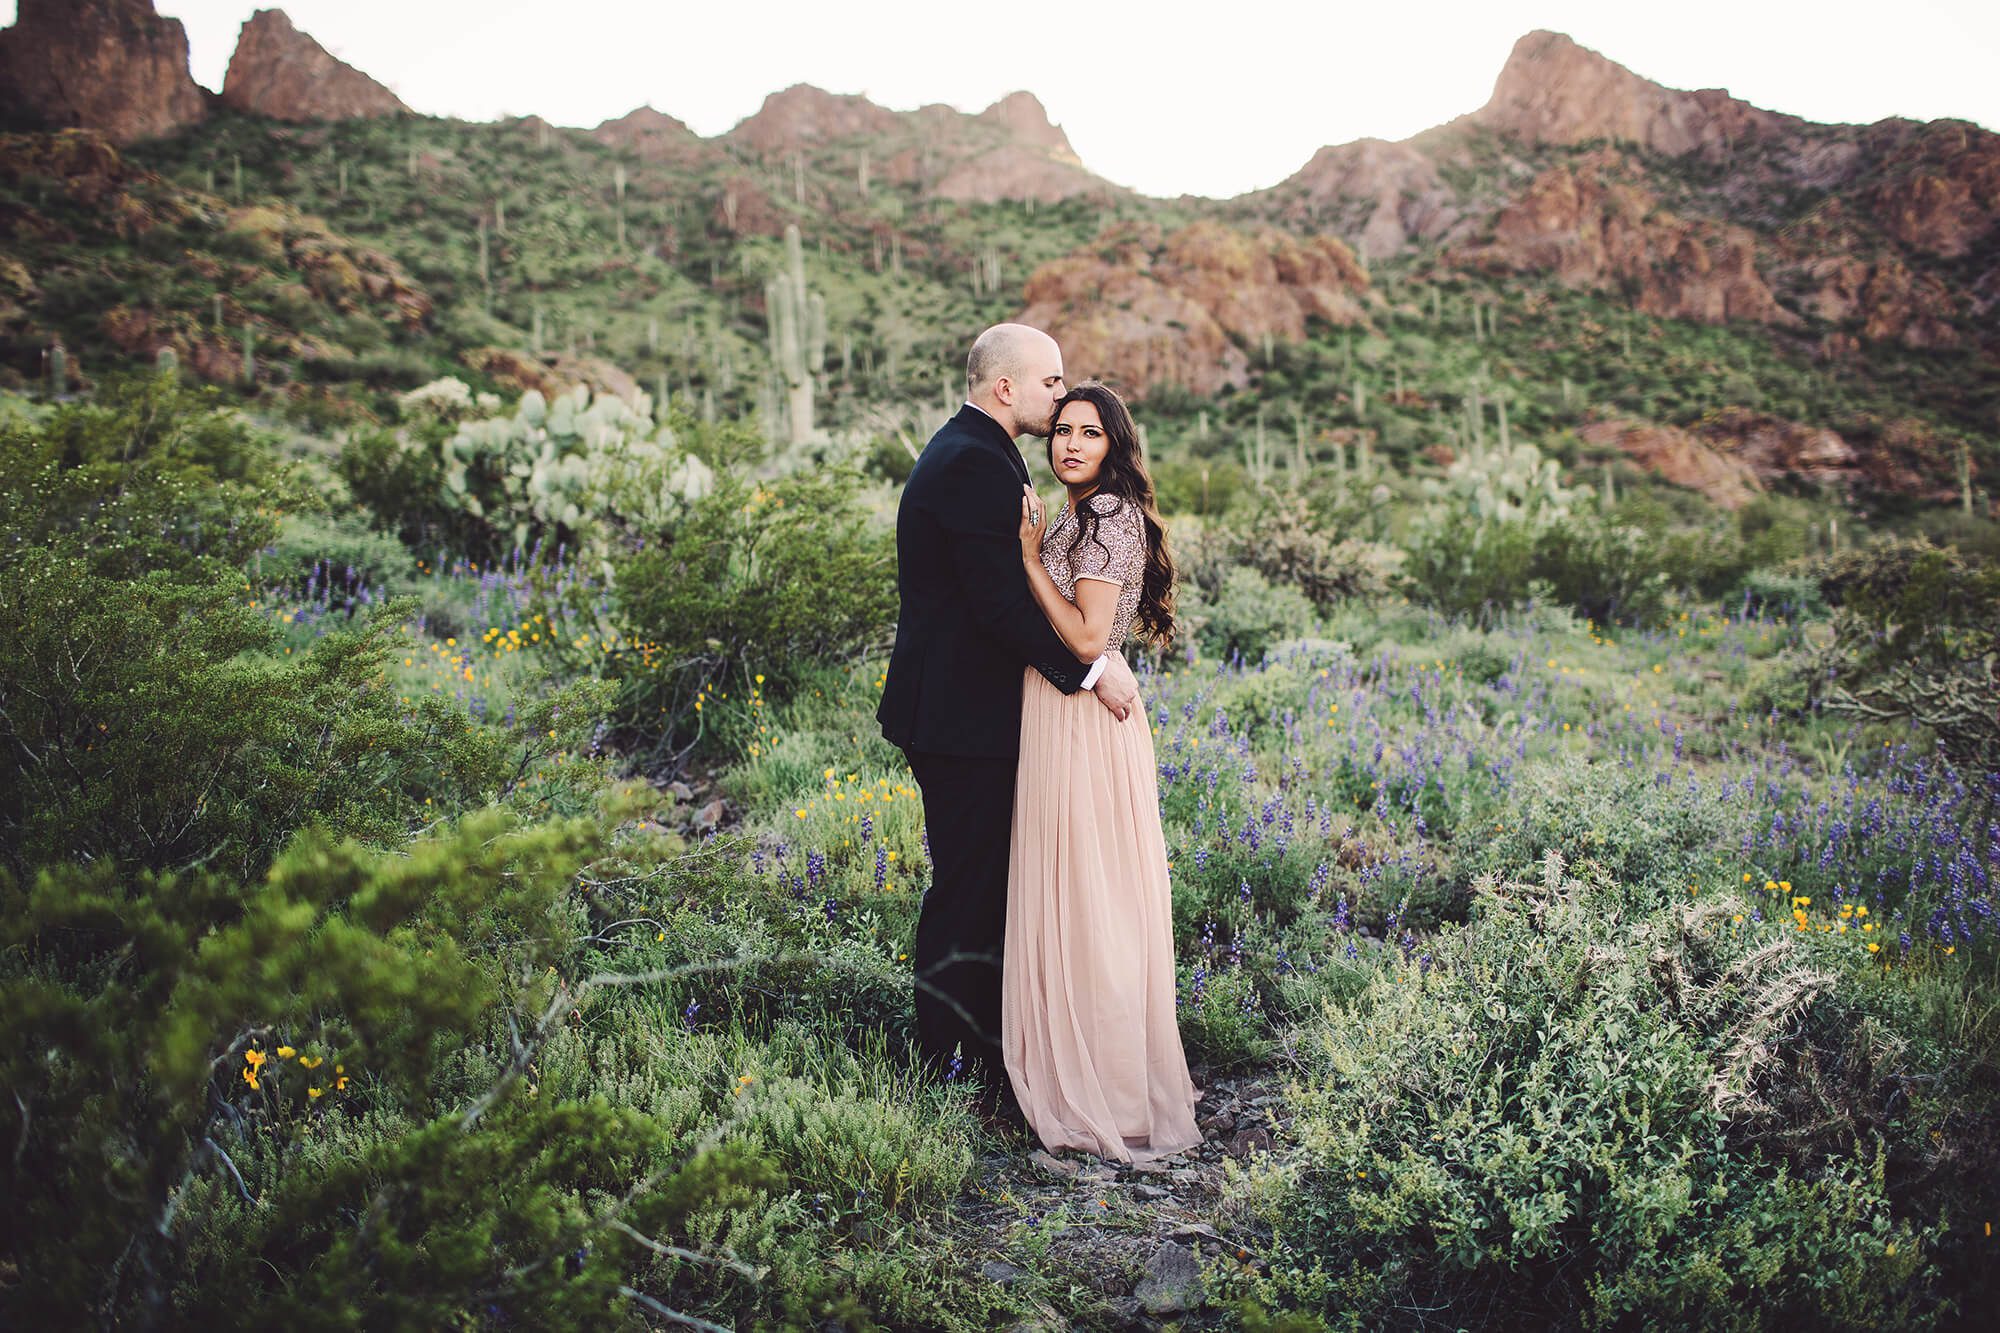 Brad kisses Vanessa surrounded by desert wildflowers during their spring couples session at Picacho Peak